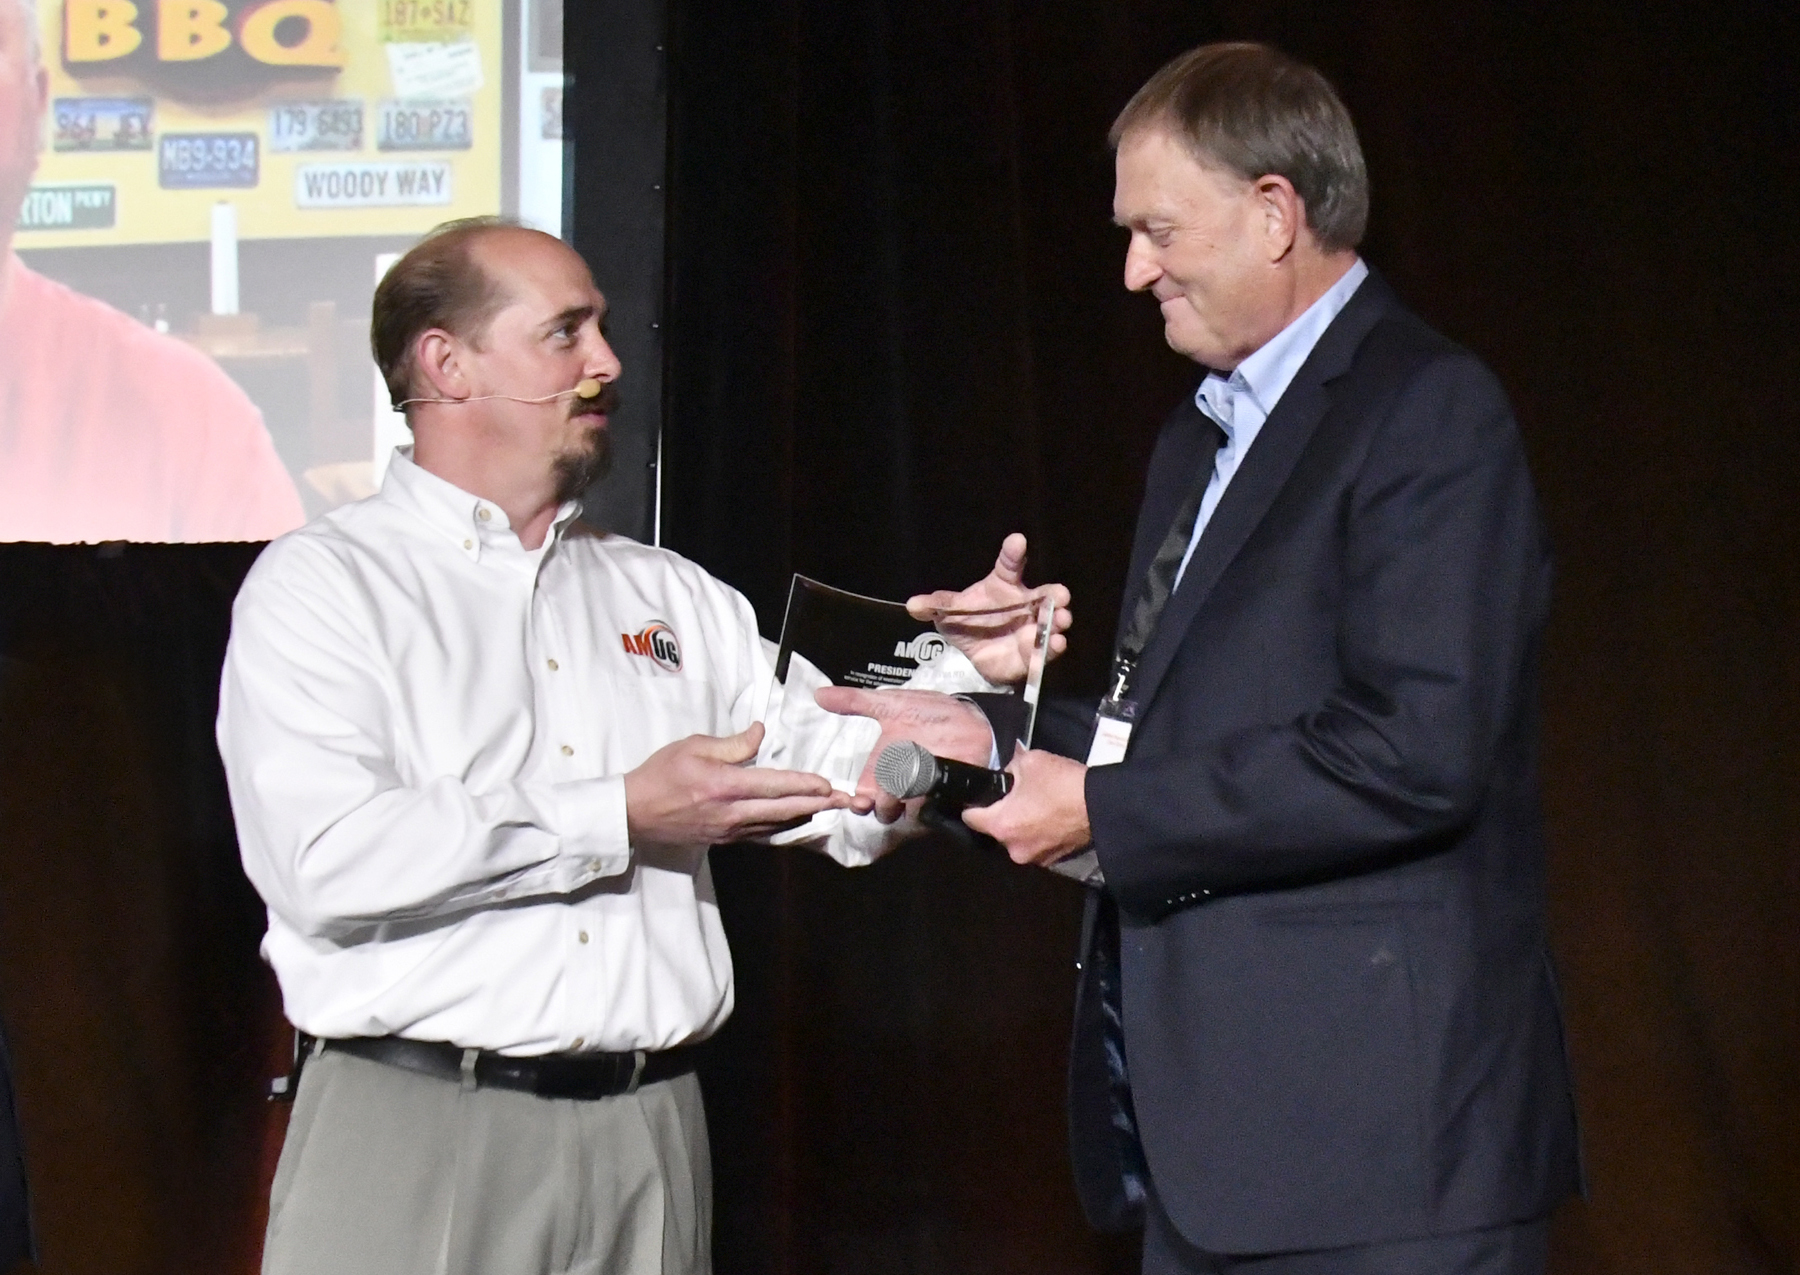 Scott Crump (right) accepts the President's Award on behalf of Terry Hoppe, presented by Carl Dekker.